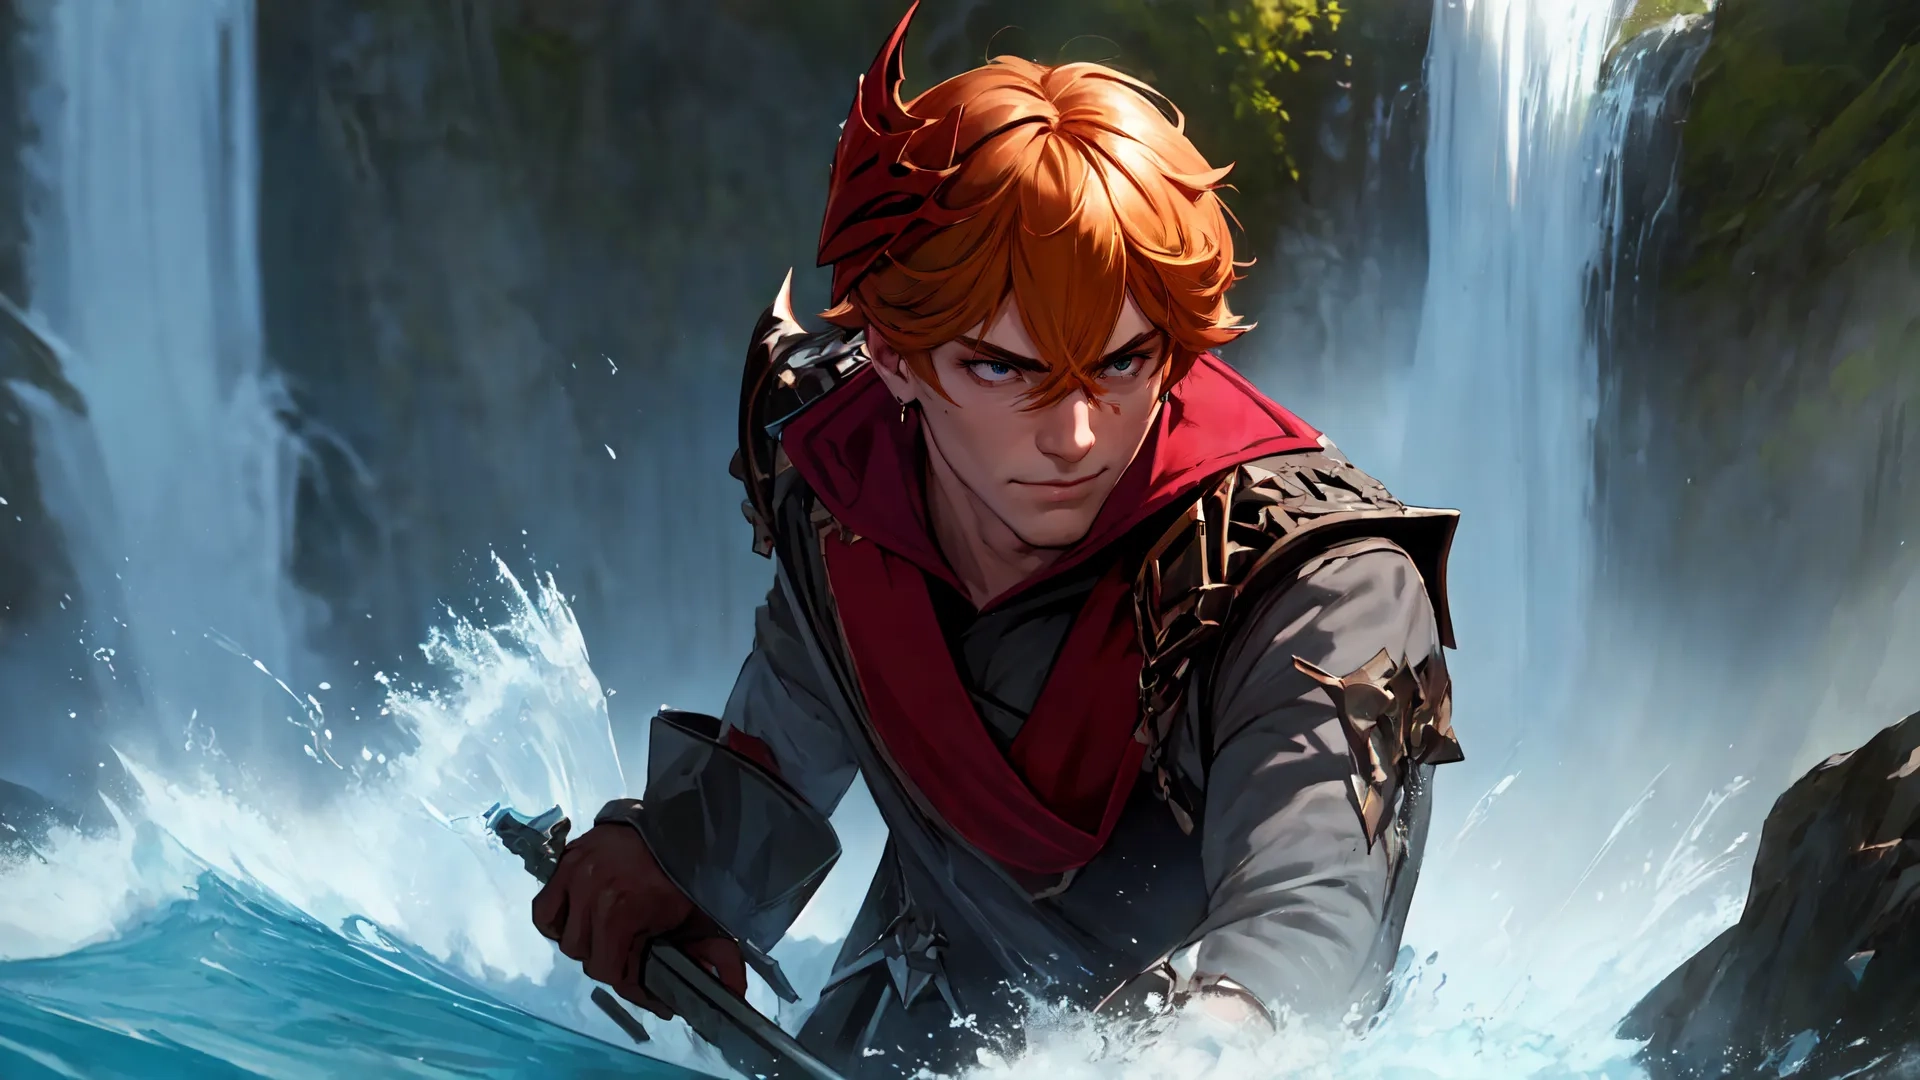 a young red haired man crouching down in the water with a sword standing next to a waterfall and splashing water behind him are trees with leaves
